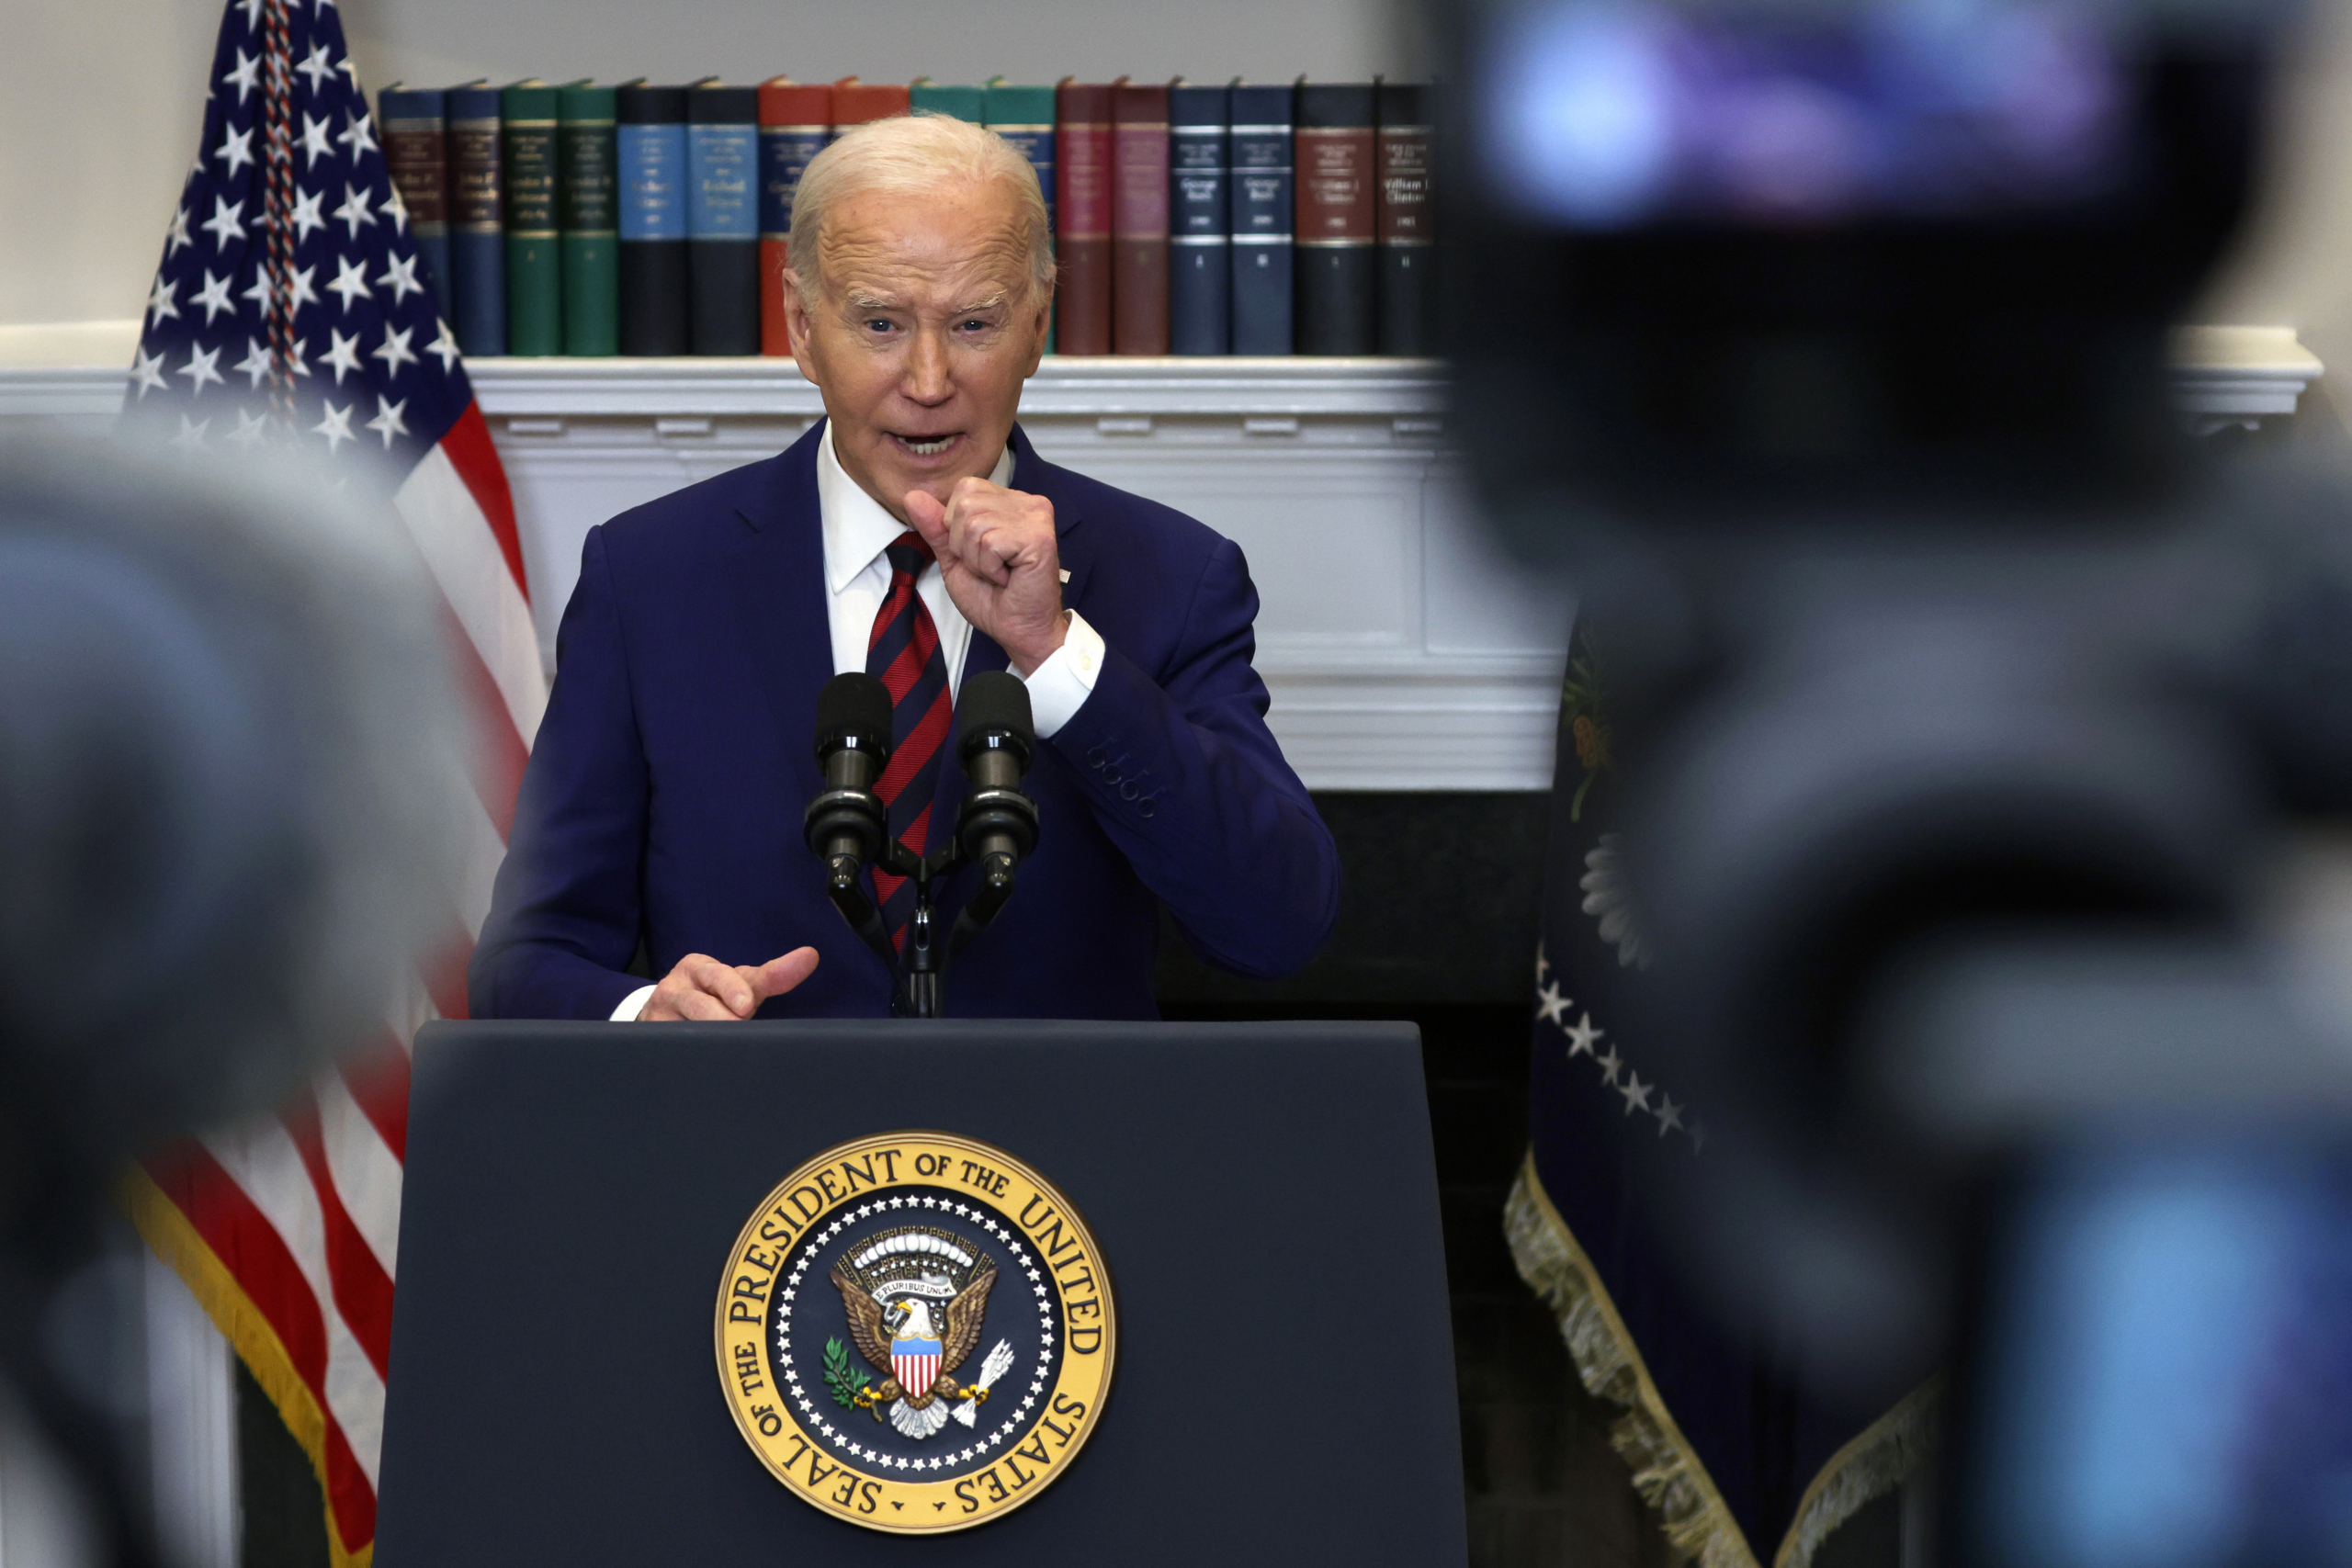 Is the Biden Campaign Strategy Fatally Flawed?